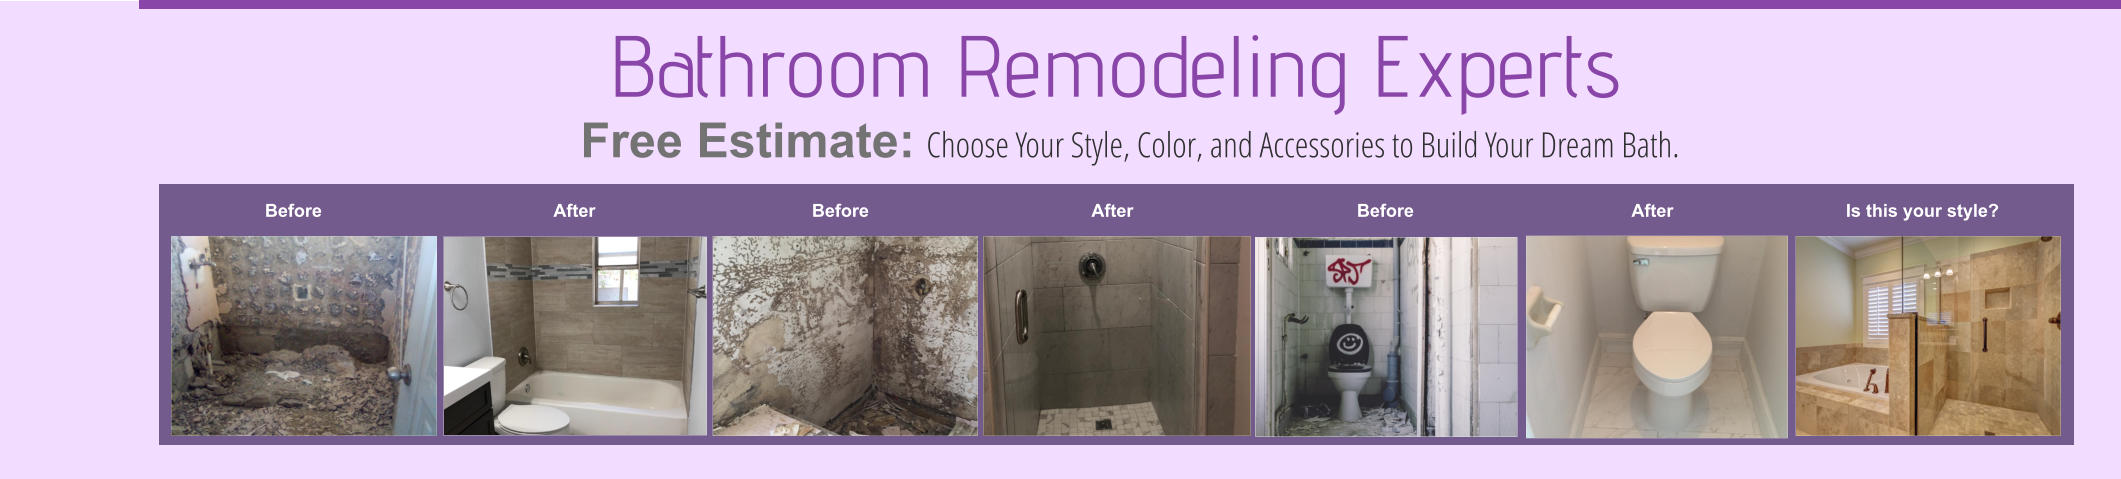 Before After Before After Before After Is this your style? Bathroom Remodeling Experts Choose Your Style, Color, and Accessories to Build Your Dream Bath. Free Estimate: